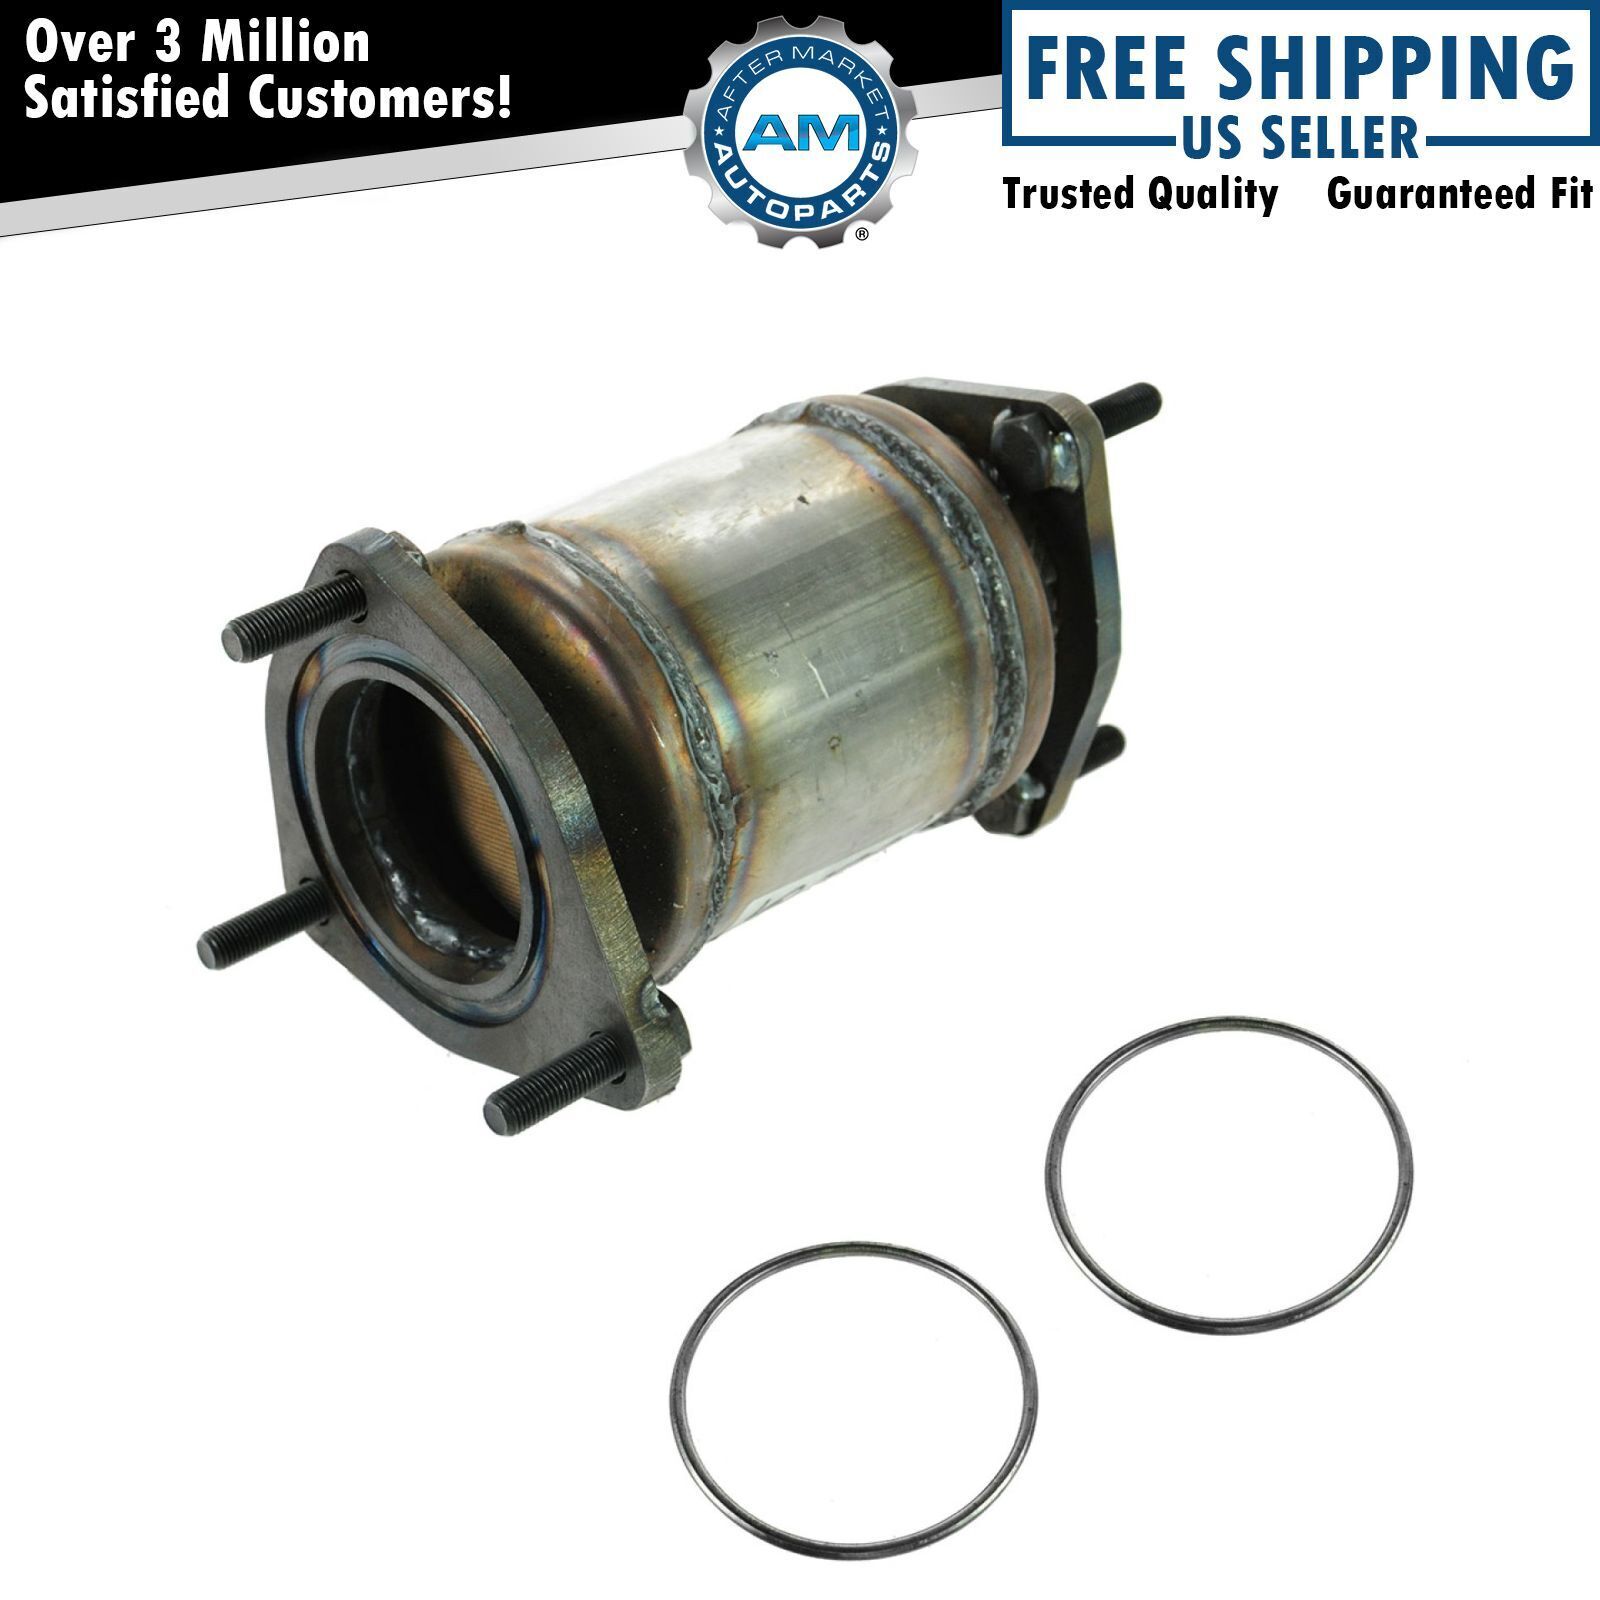 Direct Fit Front Exhaust Catalytic Converter for 99-08 Chevy Aveo Aveo5 1.6L